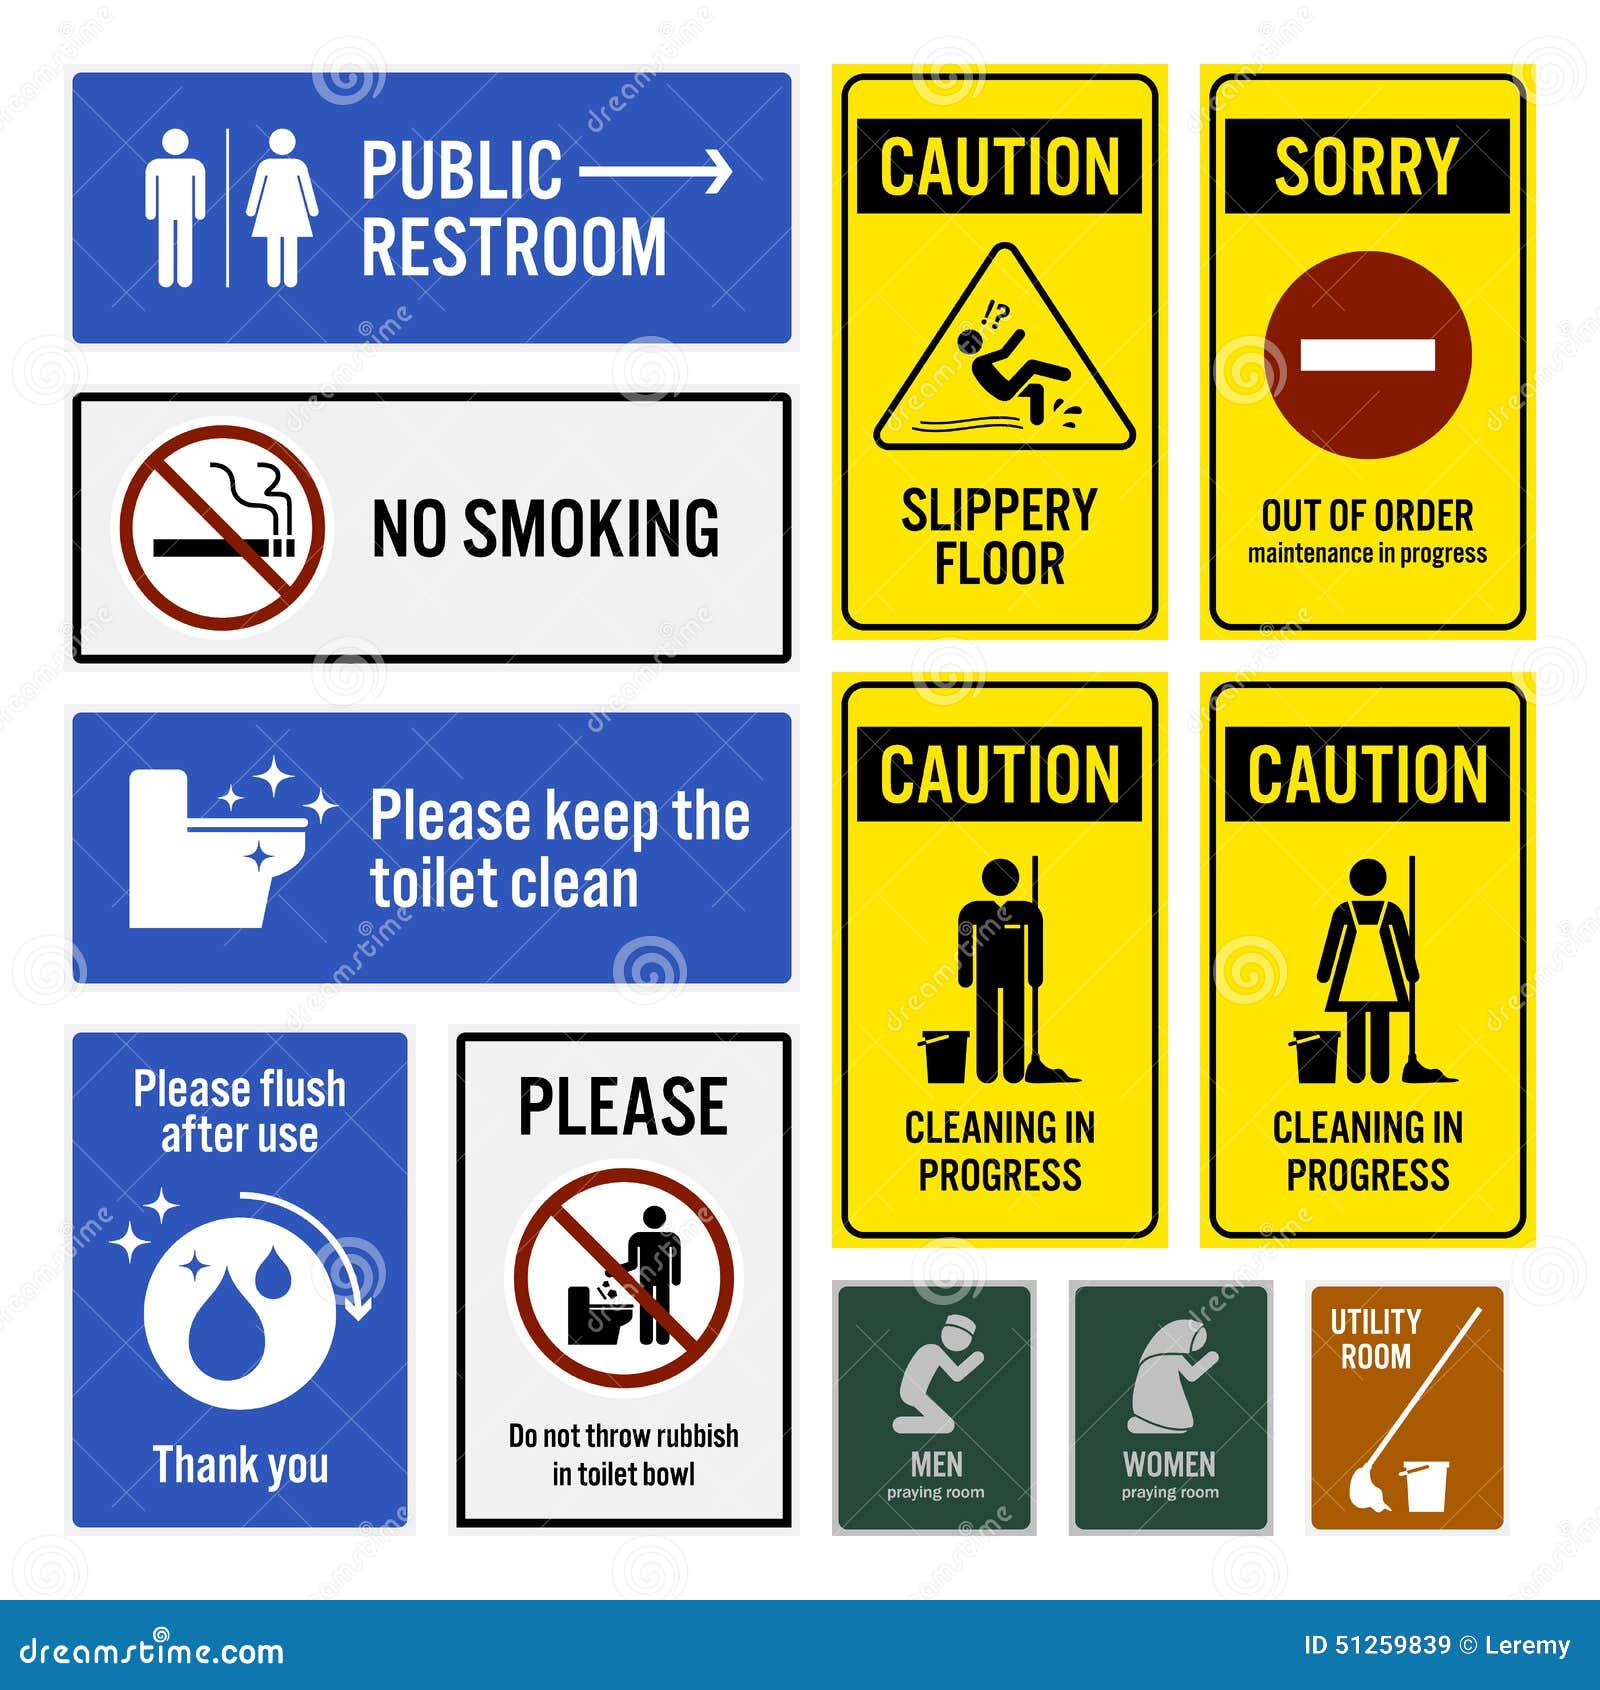 PLEASE FLUSH TOILET AFTER USE A5/A4/A3 STICKER SAFETY SIGN FOAMEX SITE SIGN